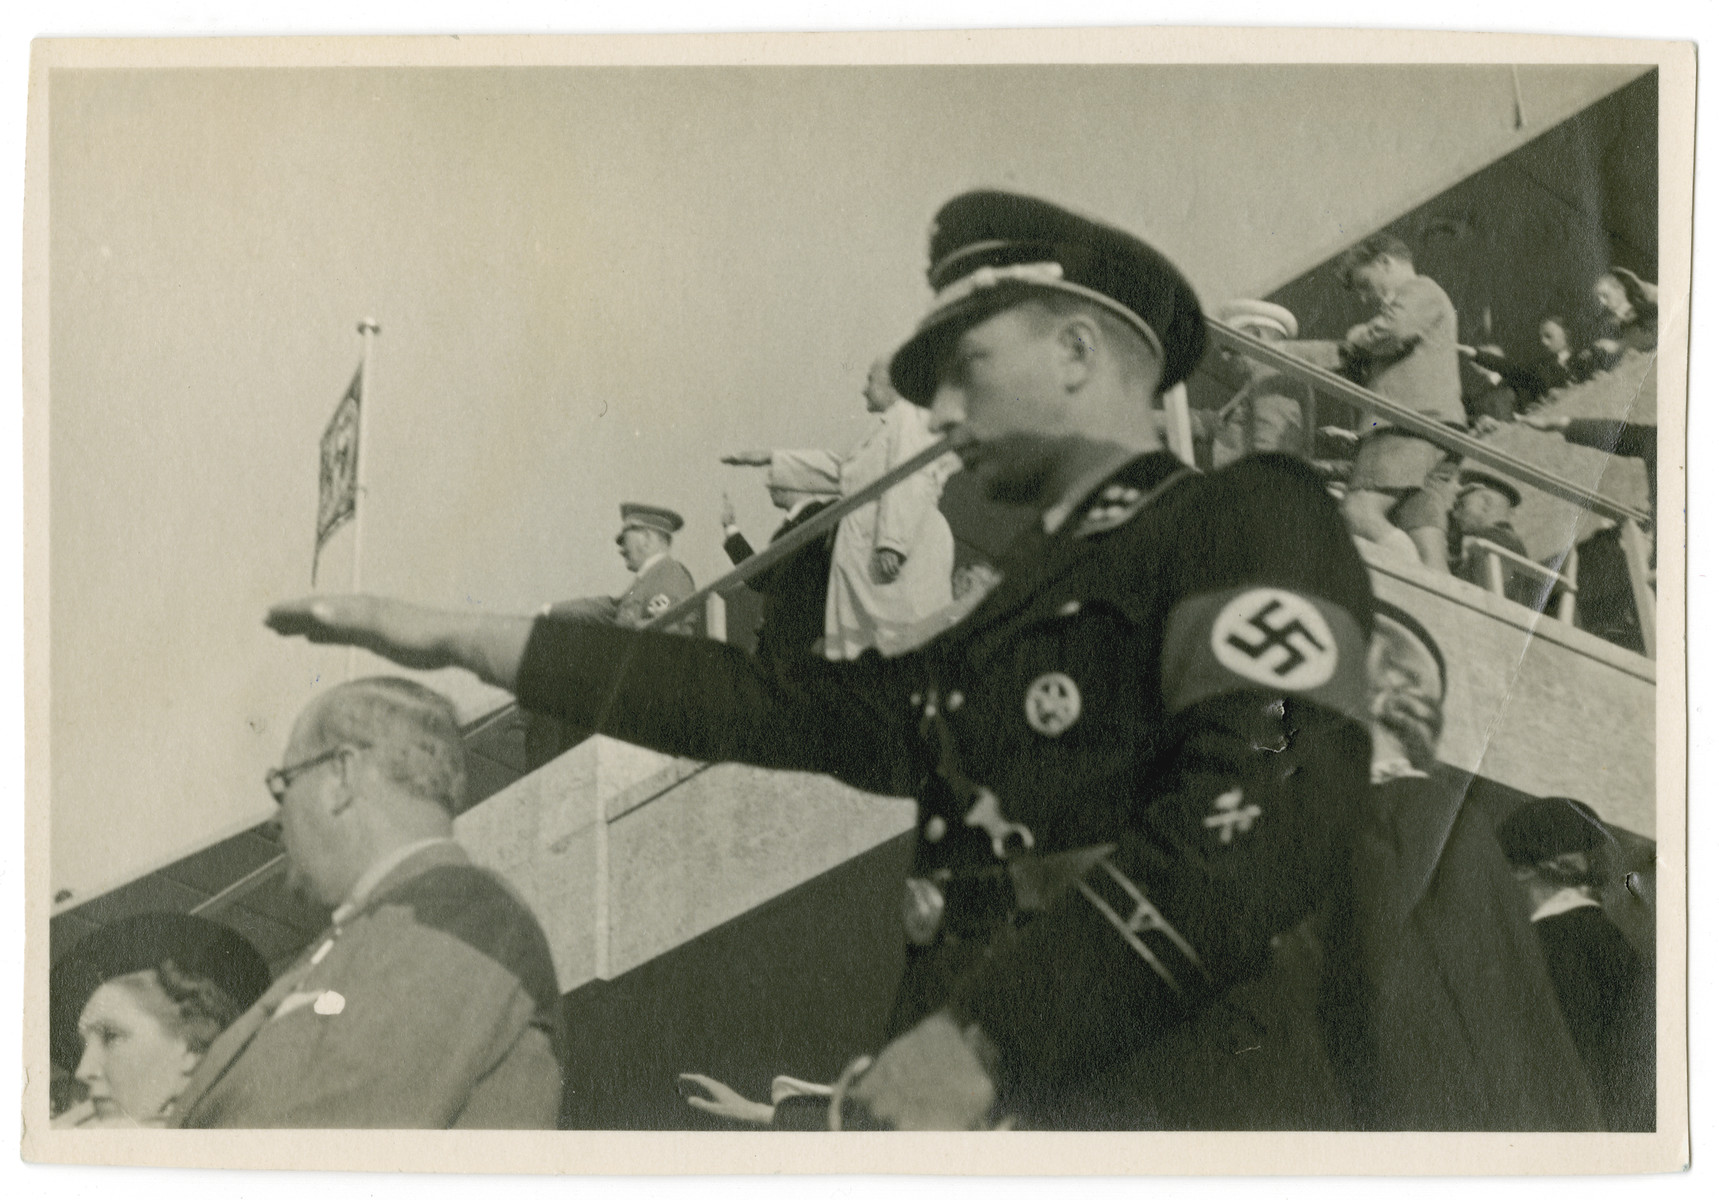 An SS man gives the Nazi salute at the start of the Berlin Olympics.

The saluting SS-man has been identified as SS-Sturmbannführer Hermnann Fegelein

The photograph was taken by Blanche Seimars (later Ensz) a young American woman visiting Germany from the United States.